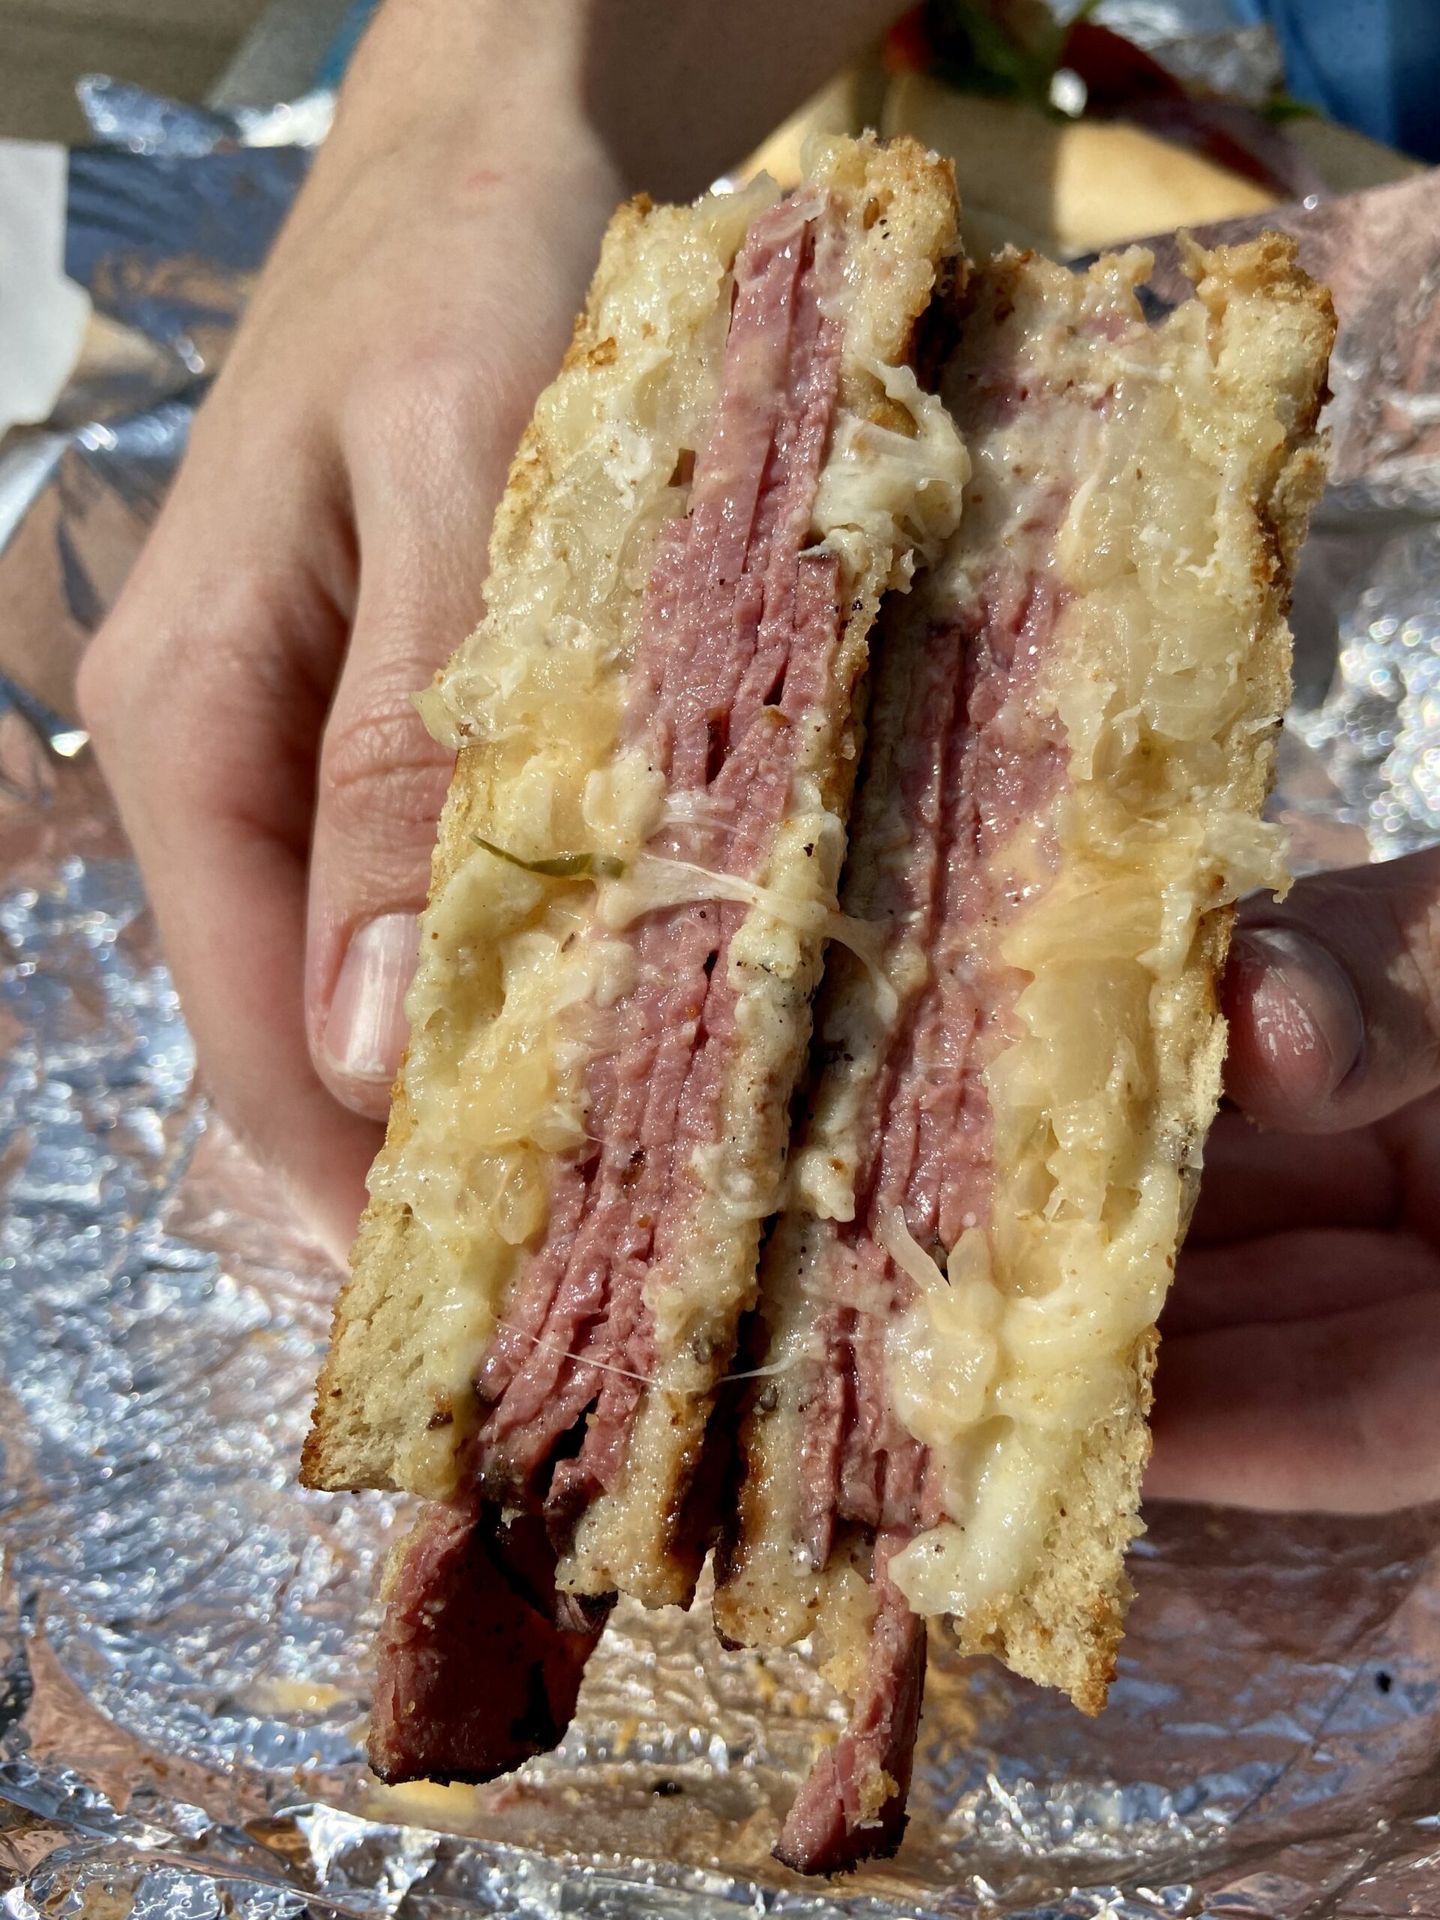 Reuben from Common Market in Plaza Midwood